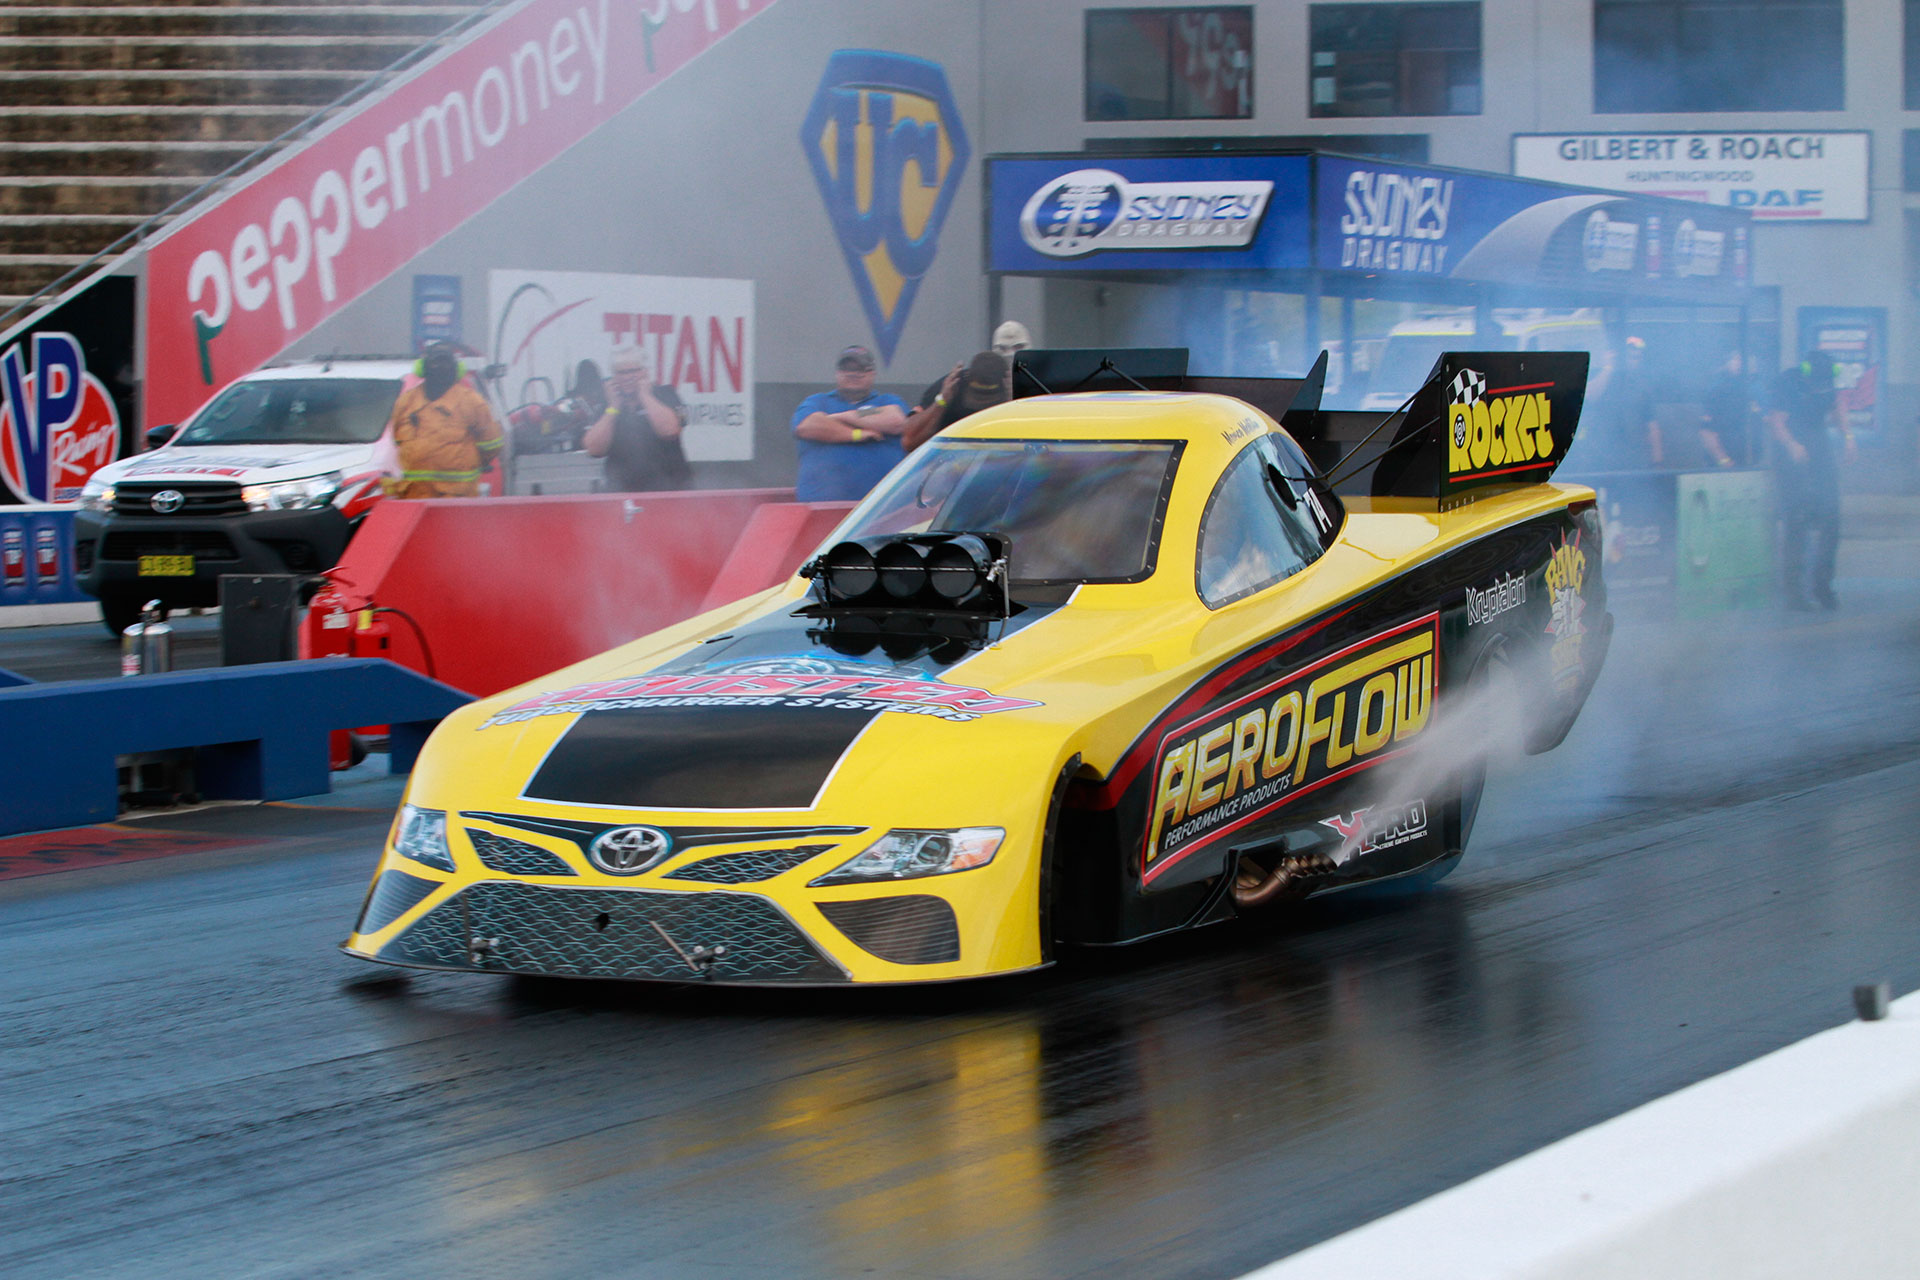 Aeroflow Top Fuel Funny Car to make public debut at Willowbank Raceway,  April 9th - Aeroflow Outlaw Nitro Funny Cars